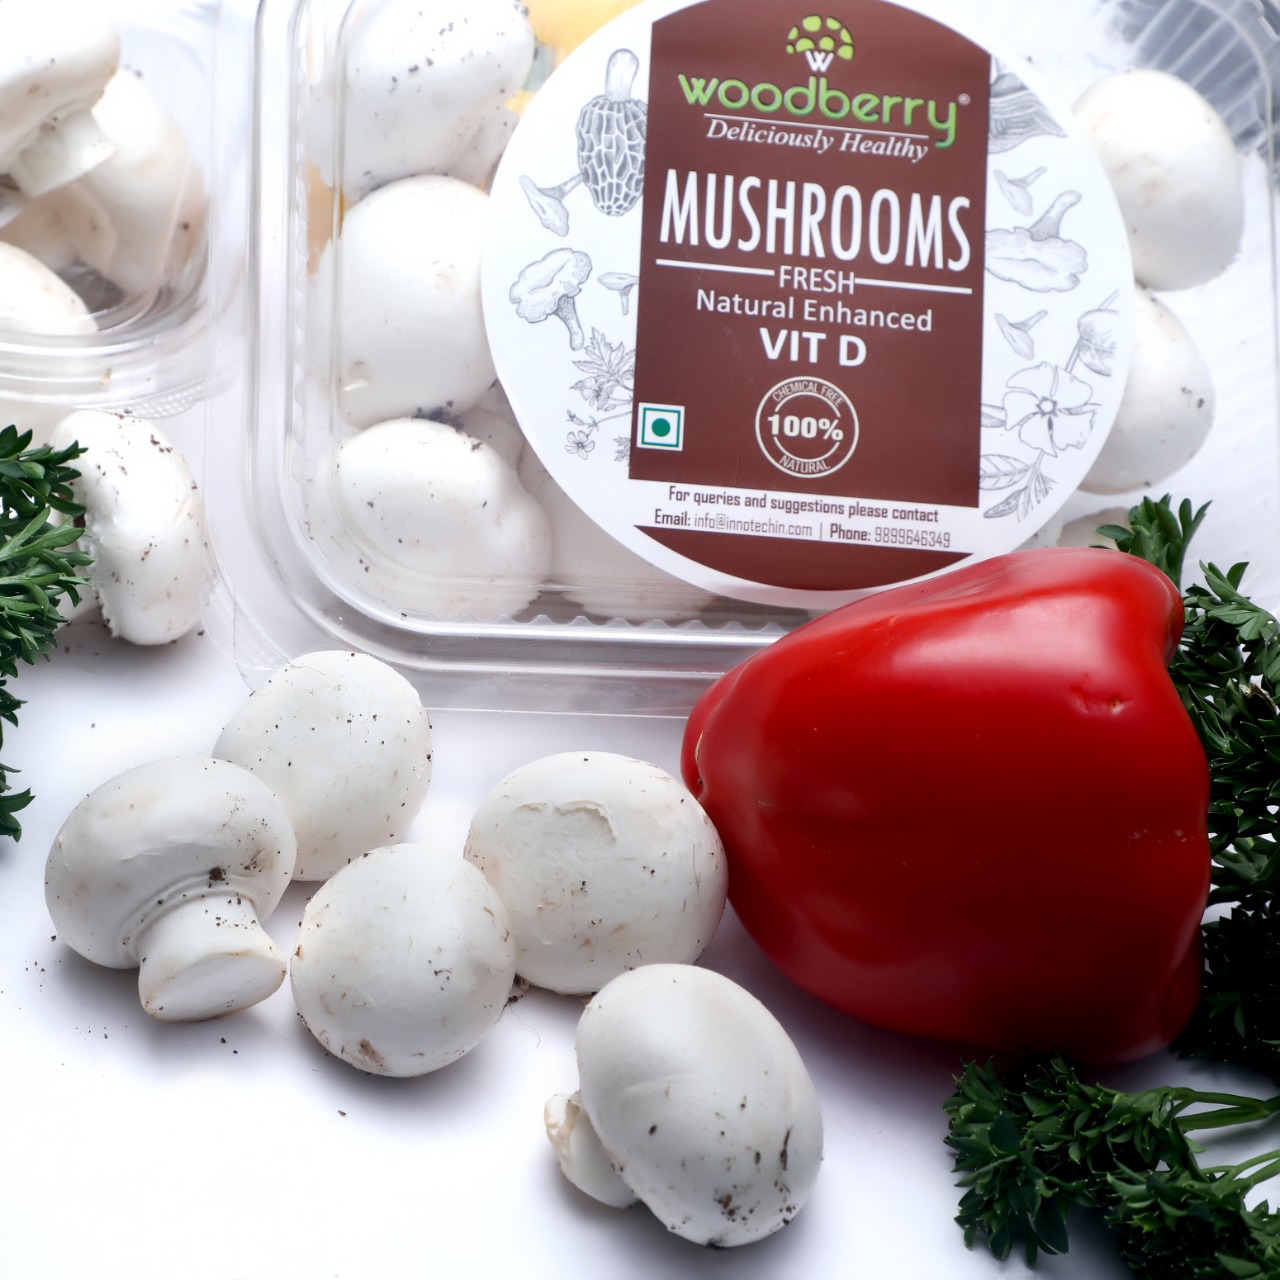 Button Fresh - 100% Chemical Free Mushrooms from Woodberry Mushrooms